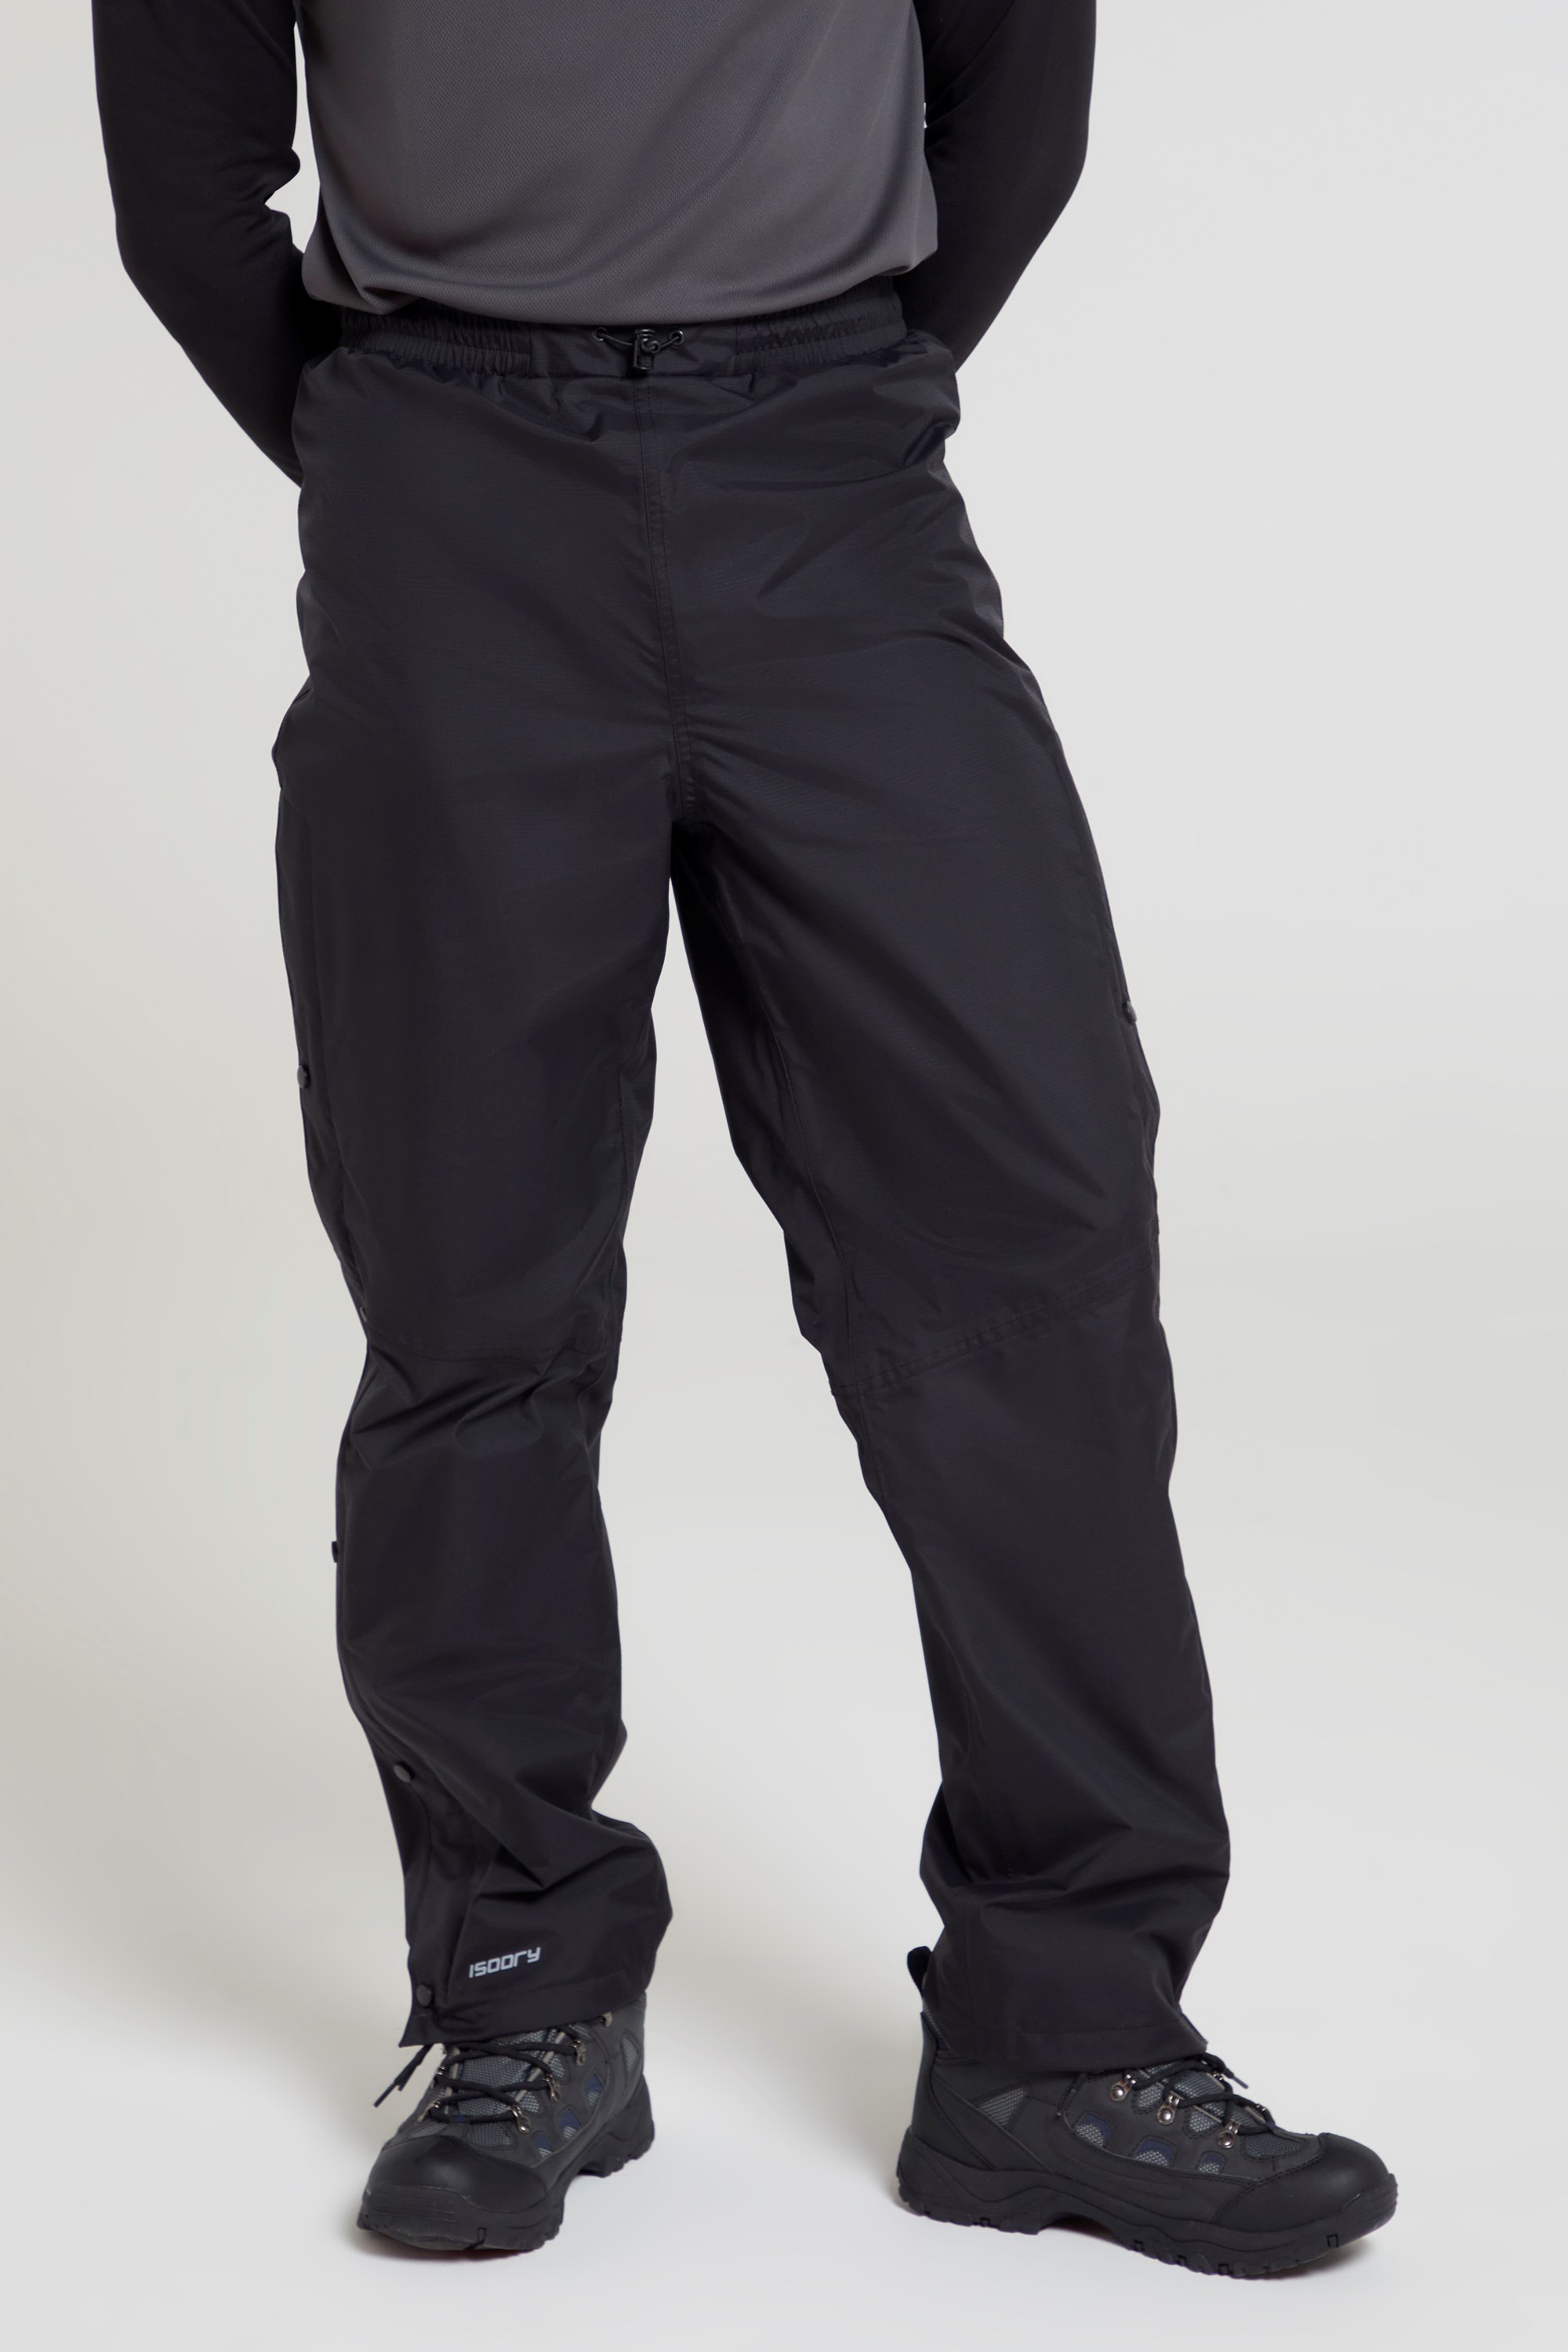 Alan Paine Dunswell Waterproof Trousers – Gamefish